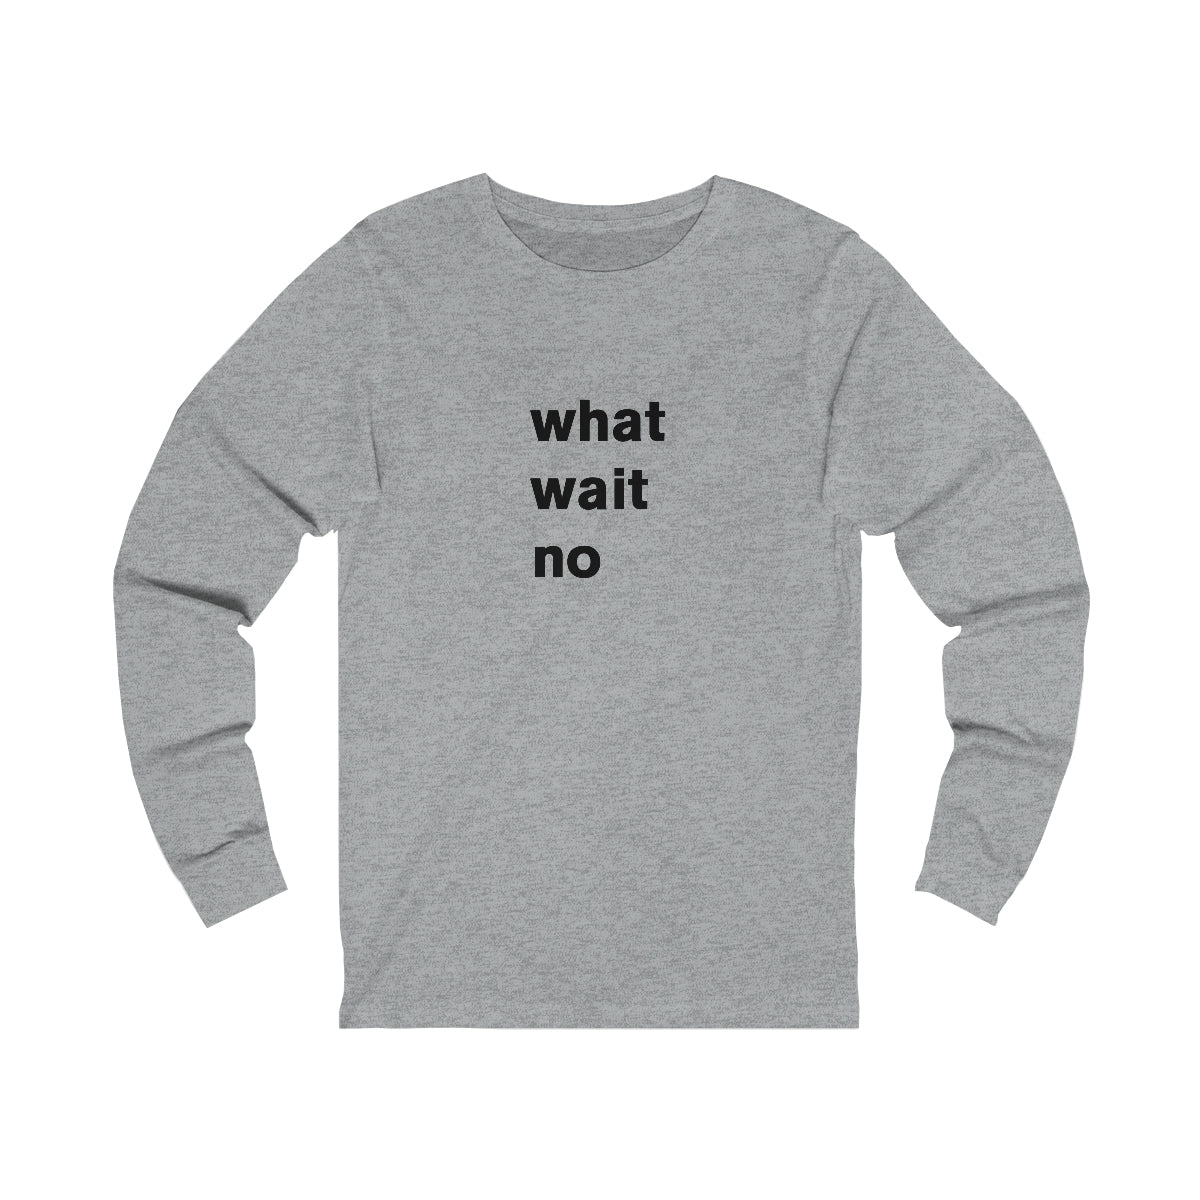 what wait no - long sleeve